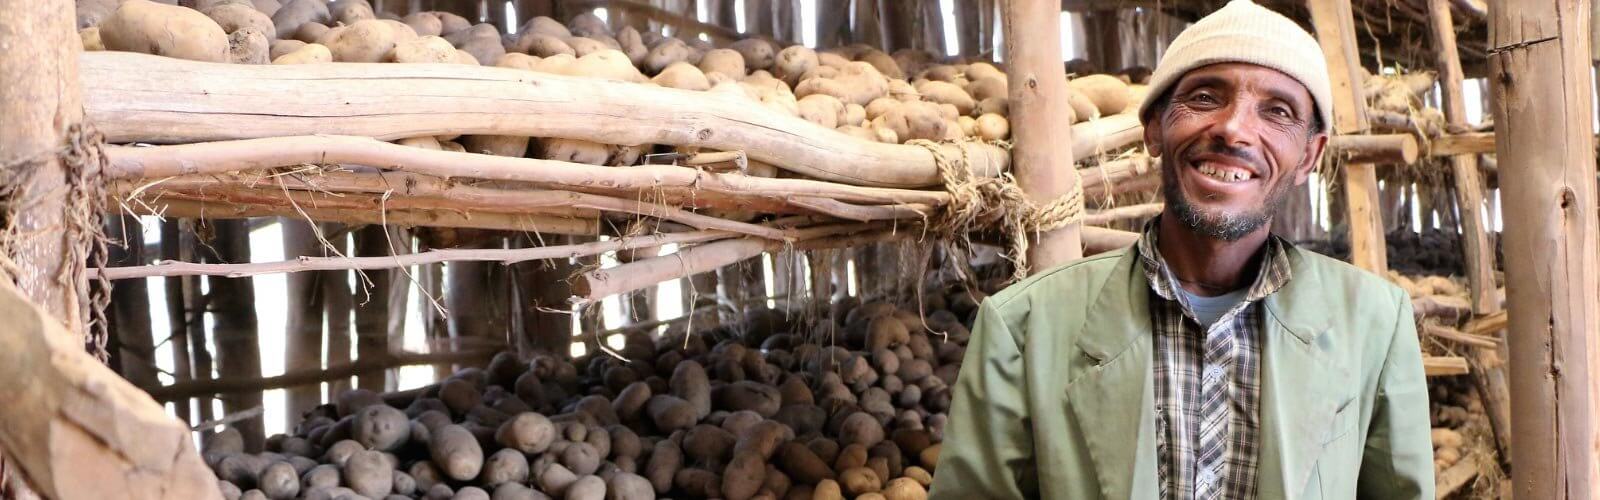 a farmer posing in front of his harvest of potatoes